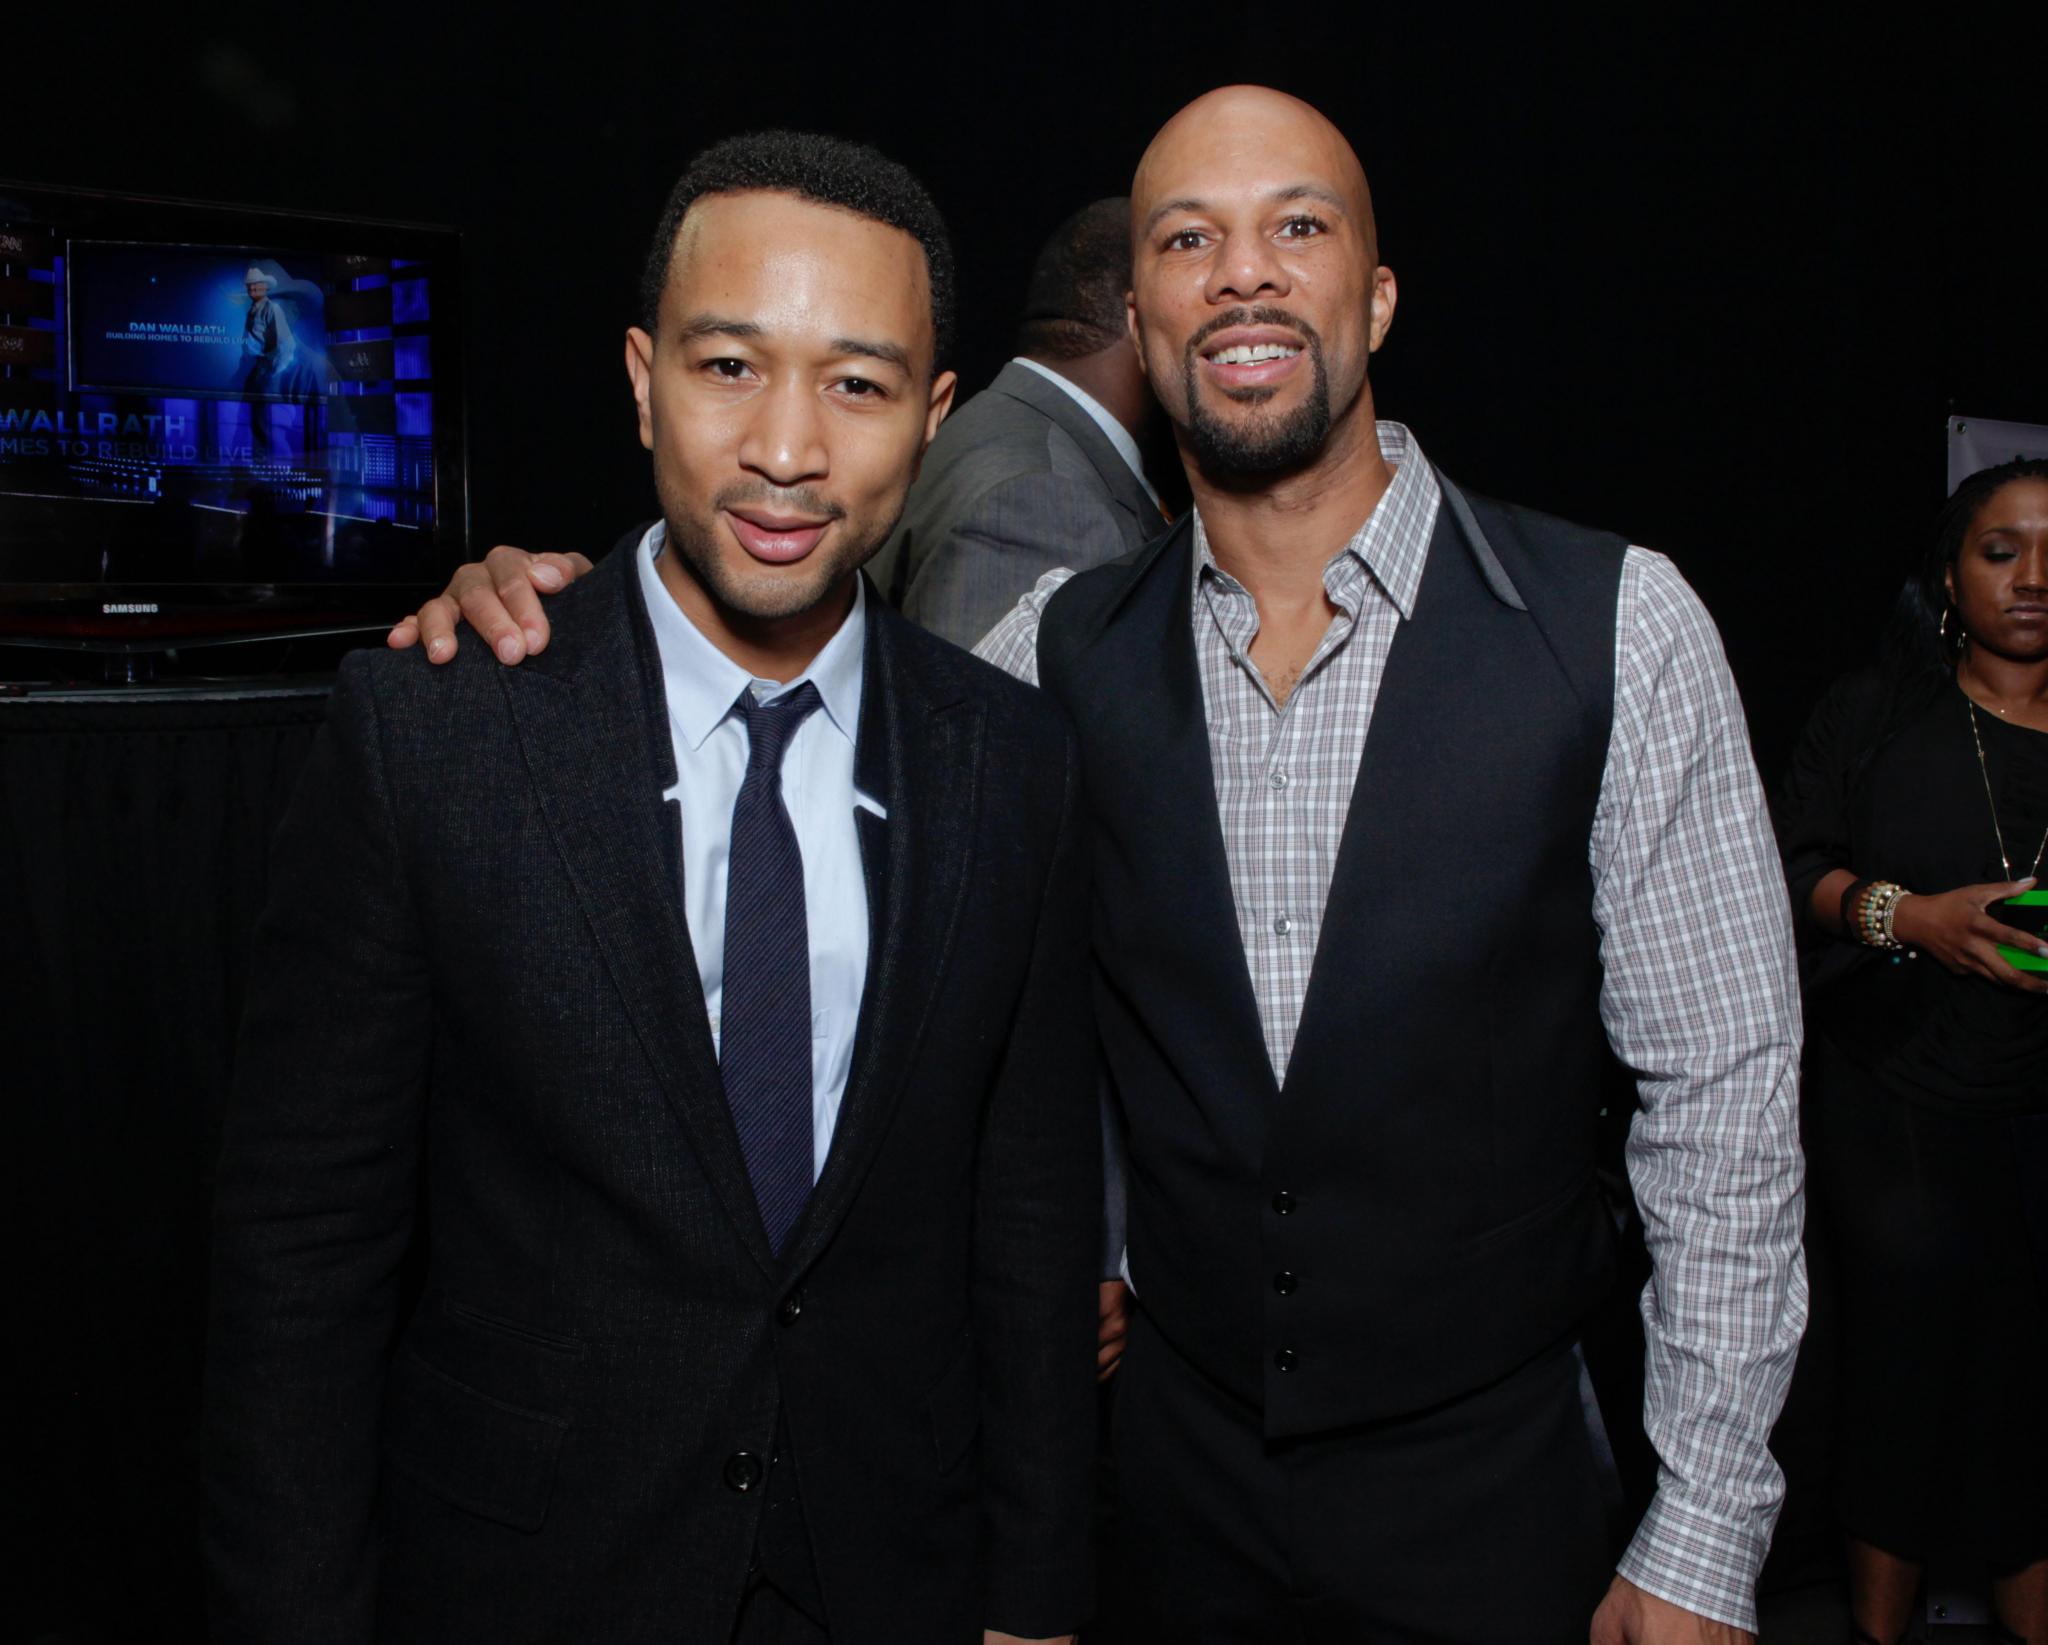 'Selma' Wins Golden Globe for Best Song, 'Glory' By John Legend and Common
